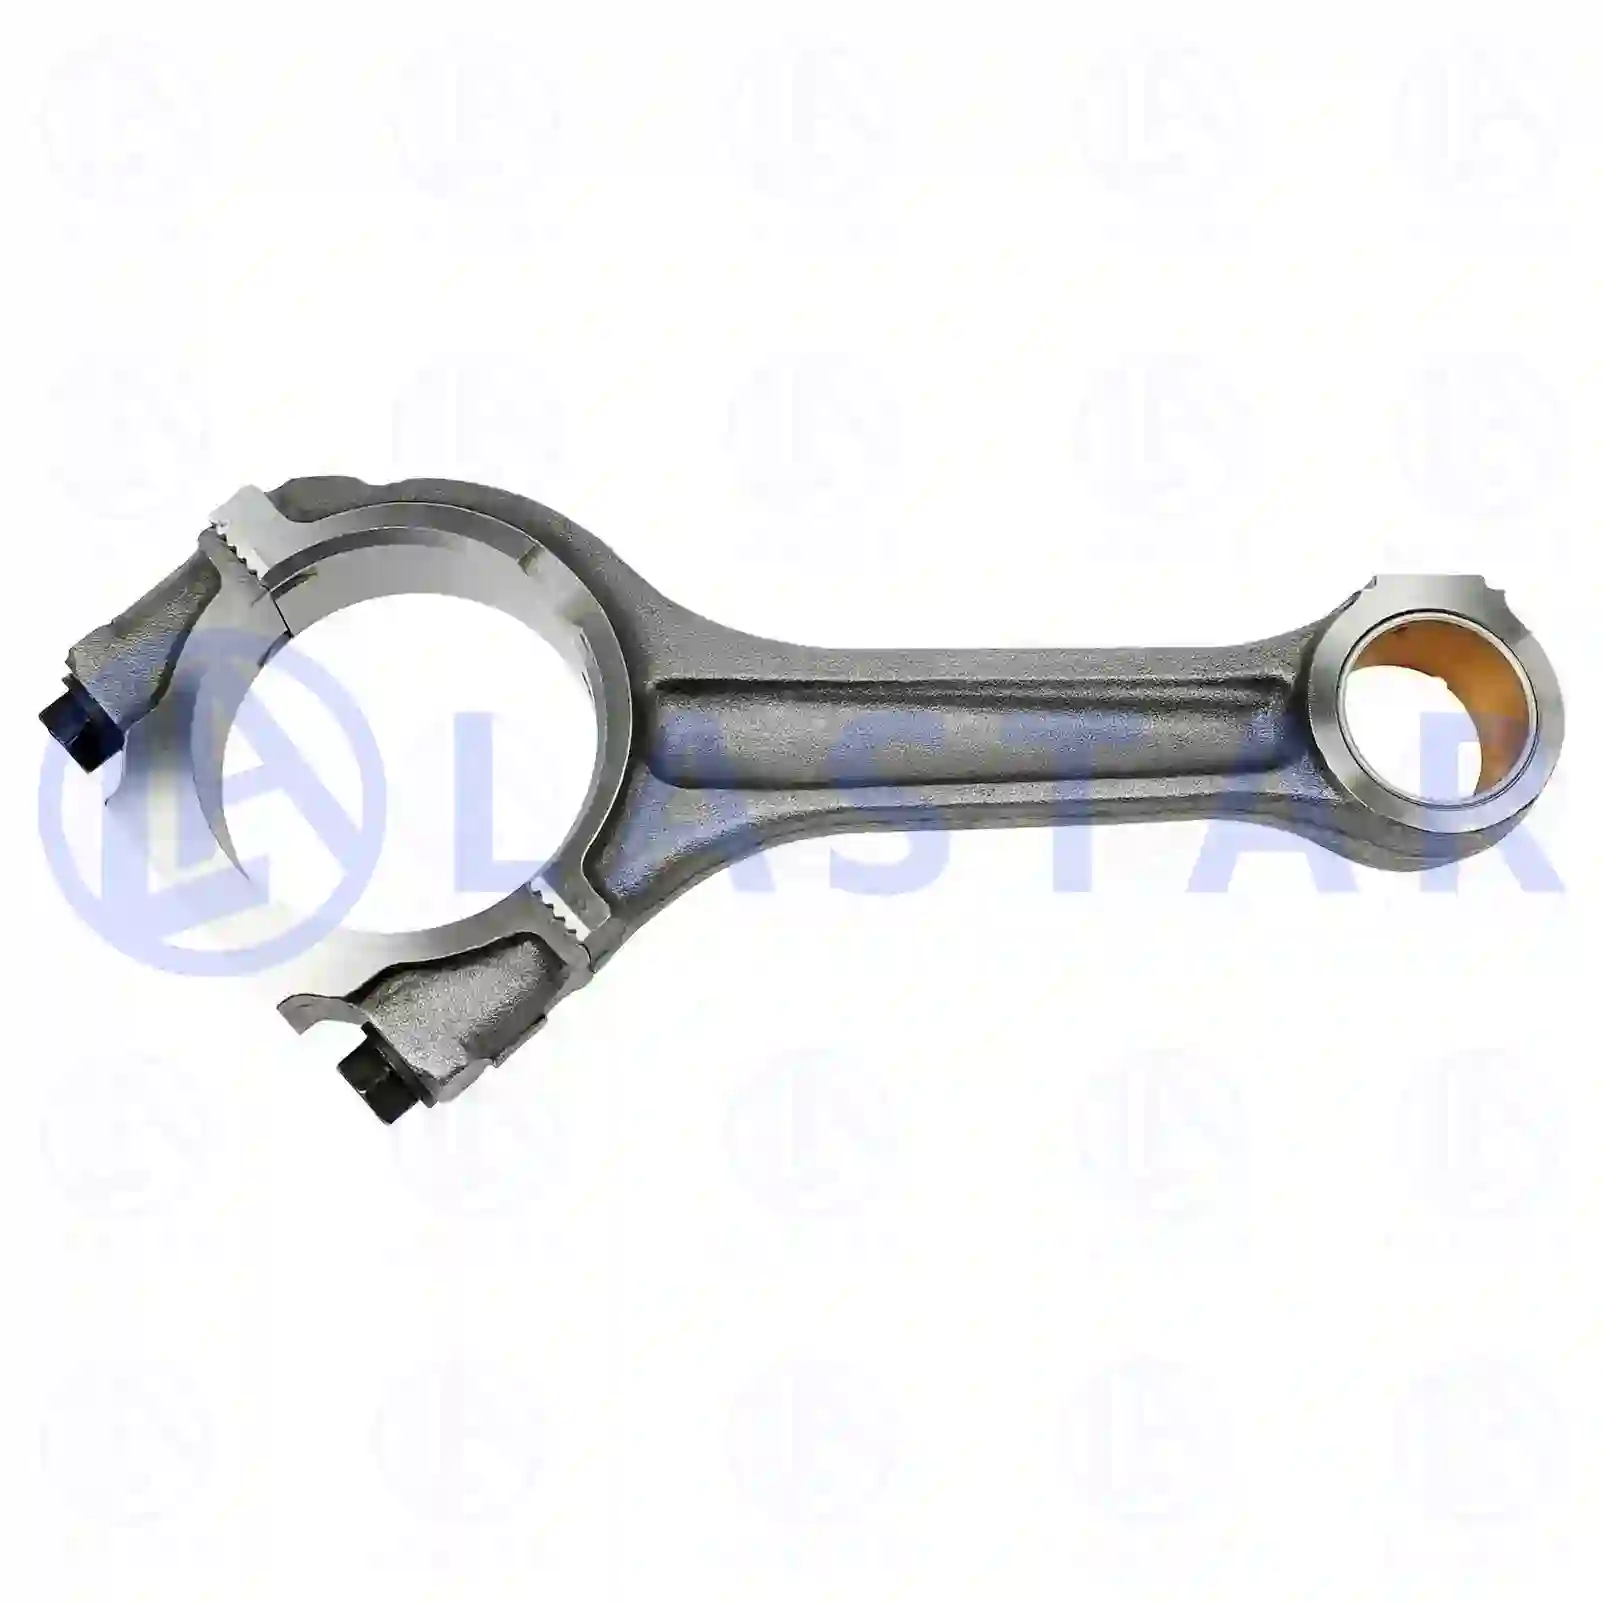 Connecting Rod              Connecting rod, straight head, la no: 77701936 ,  oem no:51024016141, 51024016214, 51024016244, 51024016264, 51024016281, 4070300020, 4070300720, 4470300220, 4470300420, 447030042080, 4470300520, 4660300020, 4660300220 Lastar Spare Part | Truck Spare Parts, Auotomotive Spare Parts